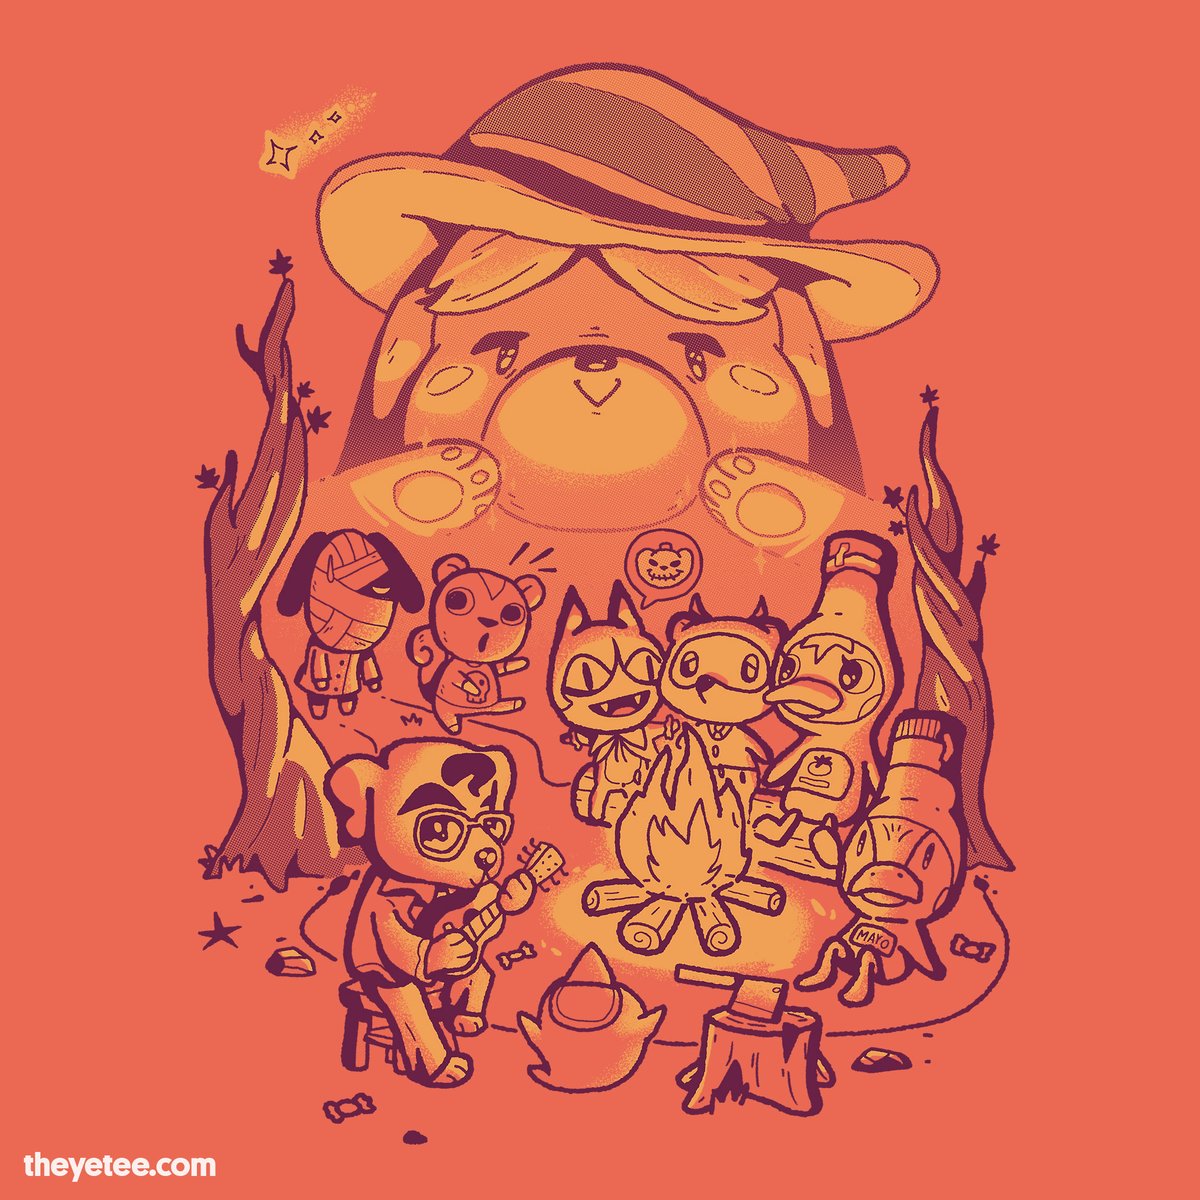 「The ringing of the bell commands you… De」|The Yetee 🌈のイラスト